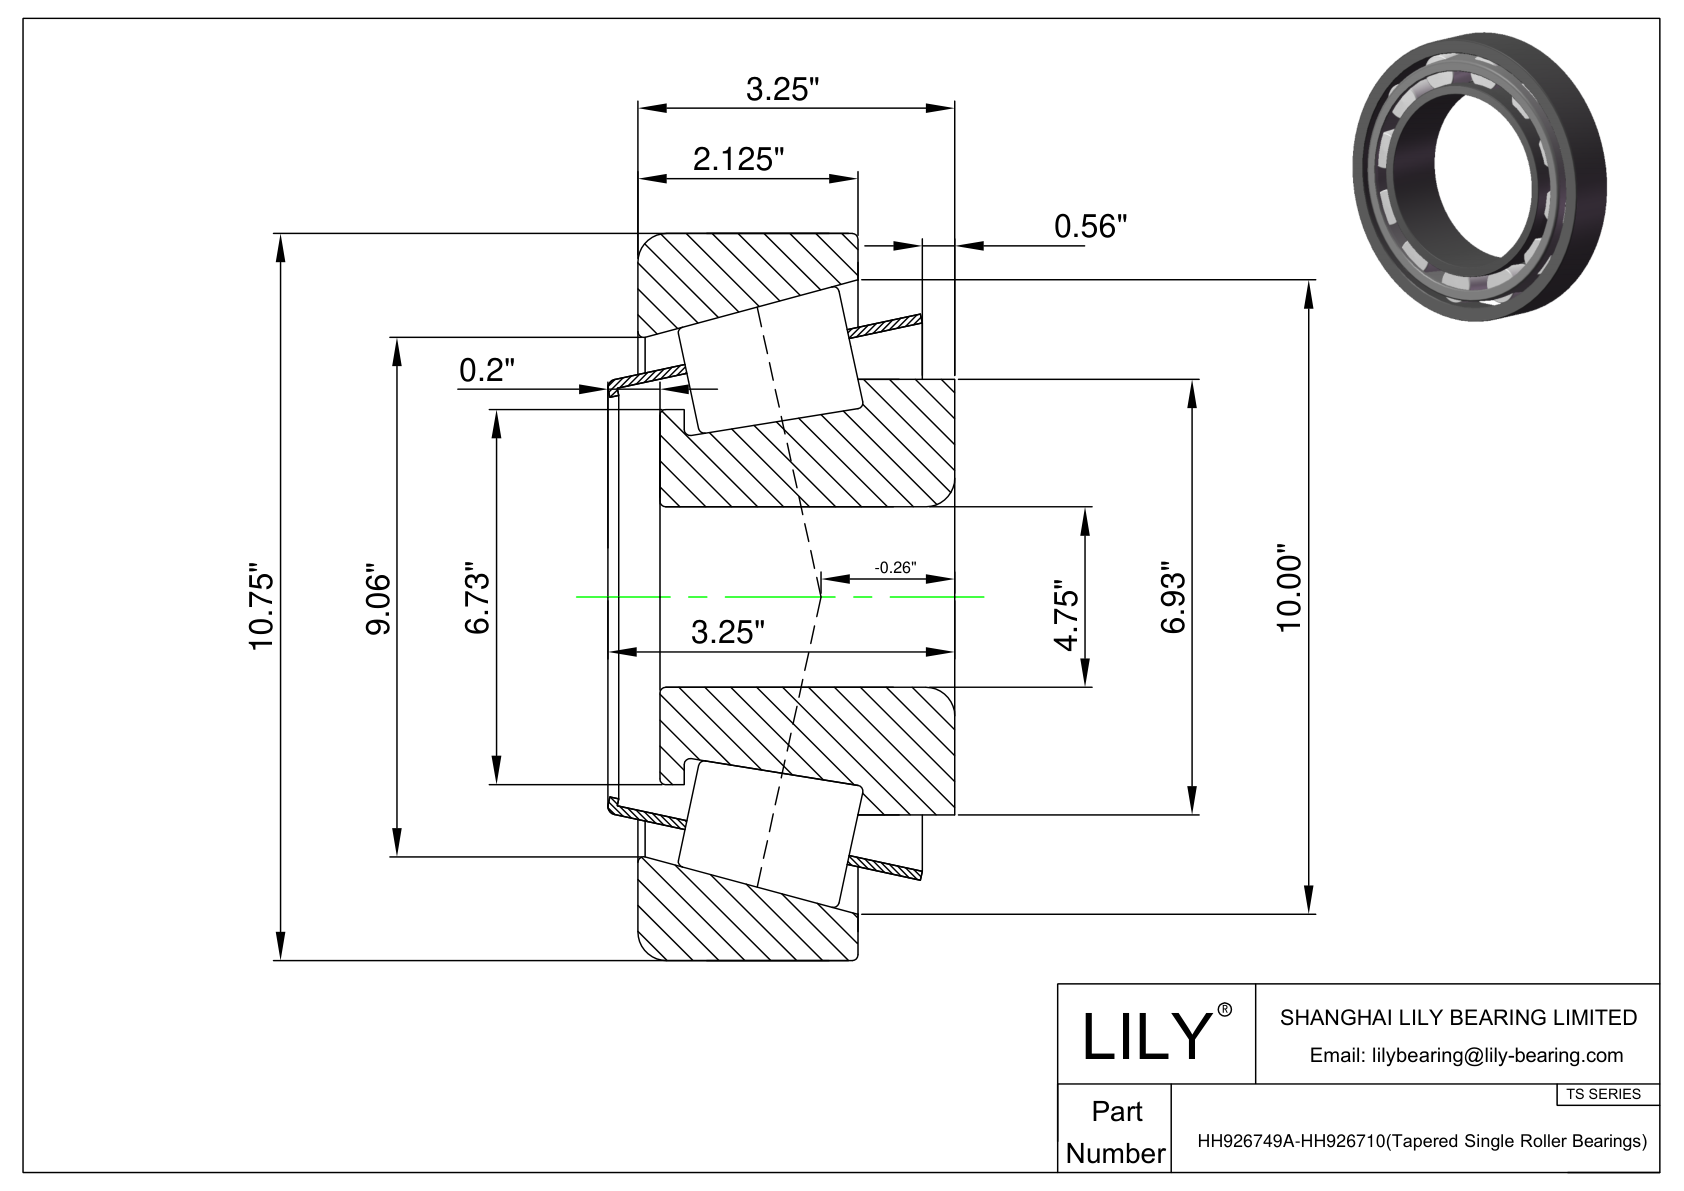 HH926749A-HH926710 TS (Tapered Single Roller Bearings) (Imperial) cad drawing